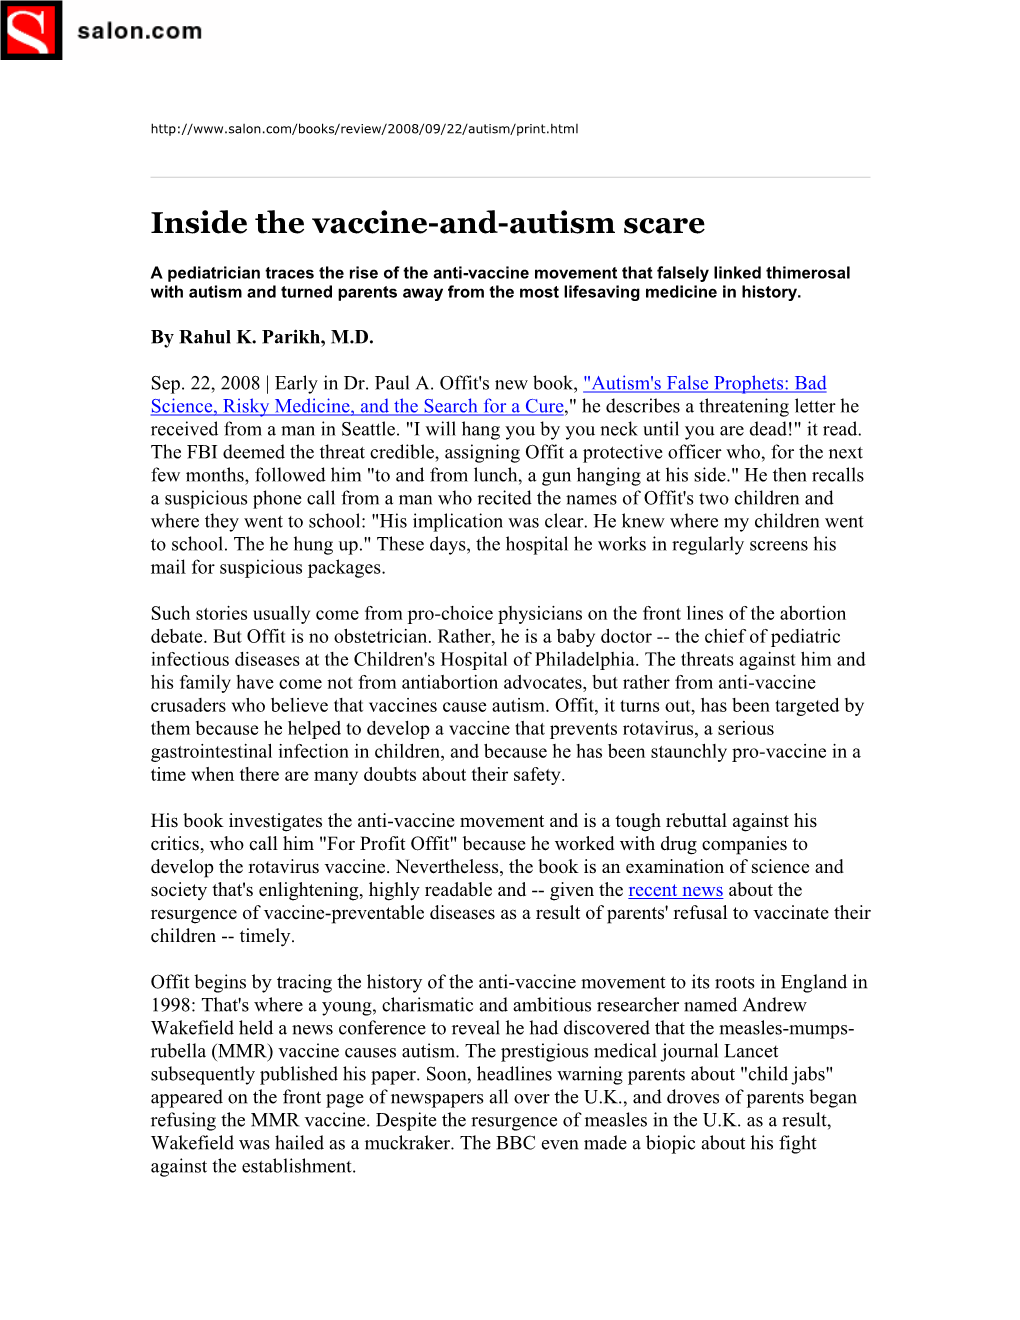 Inside the Vaccine-And-Autism Scare